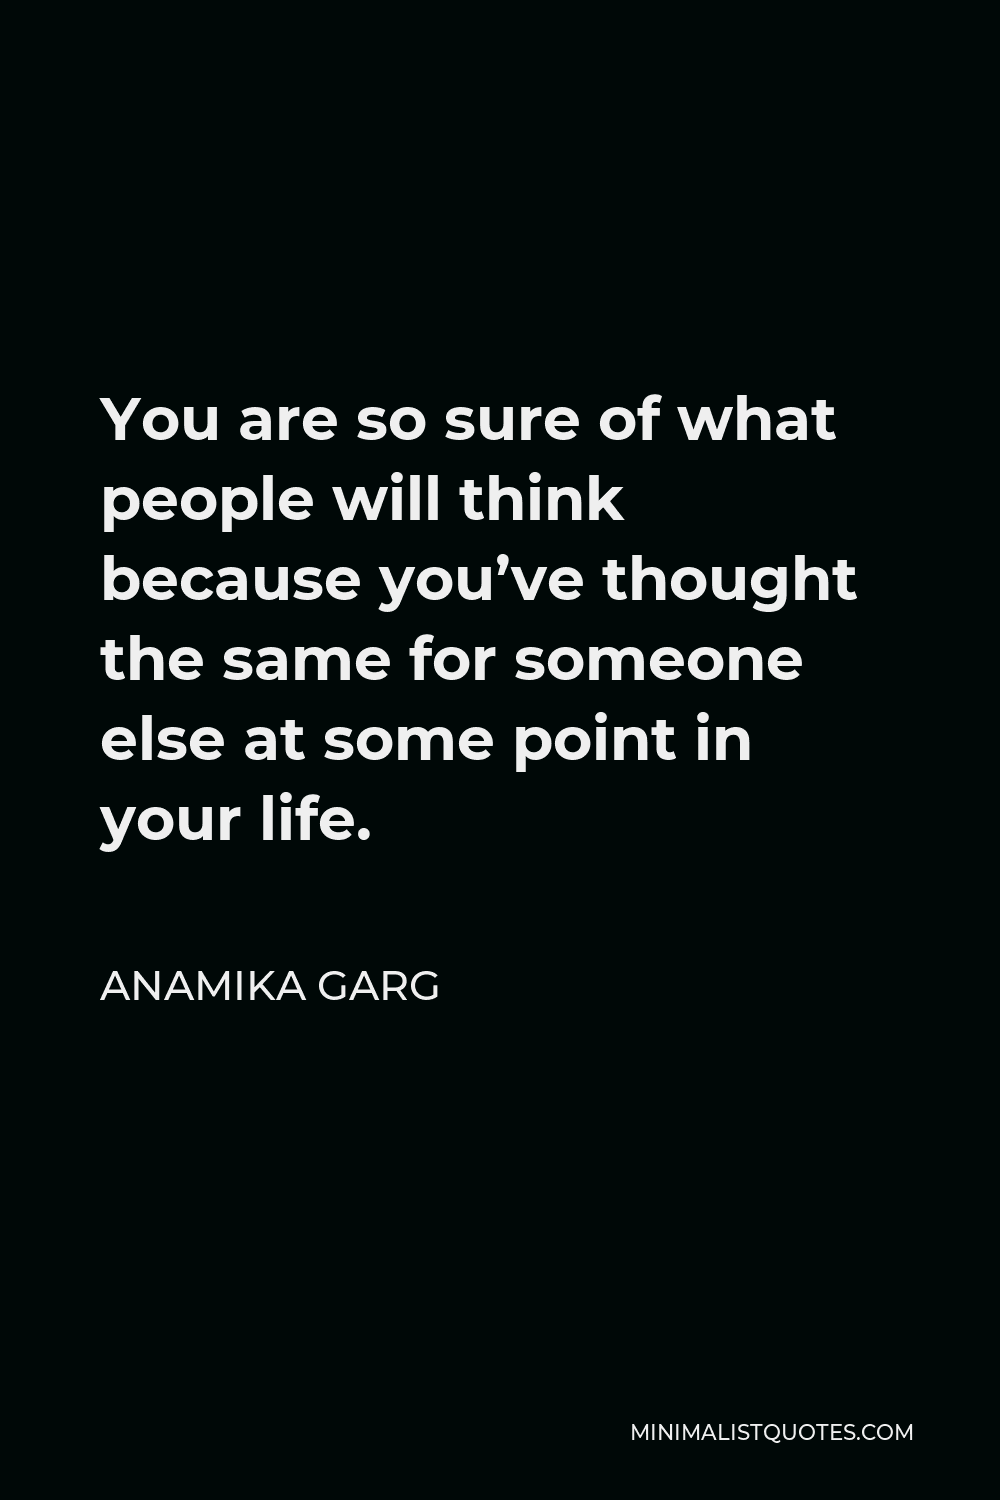 Anamika Garg Quote - You are so sure of what people will think because you’ve thought the same for someone else at some point in your life.